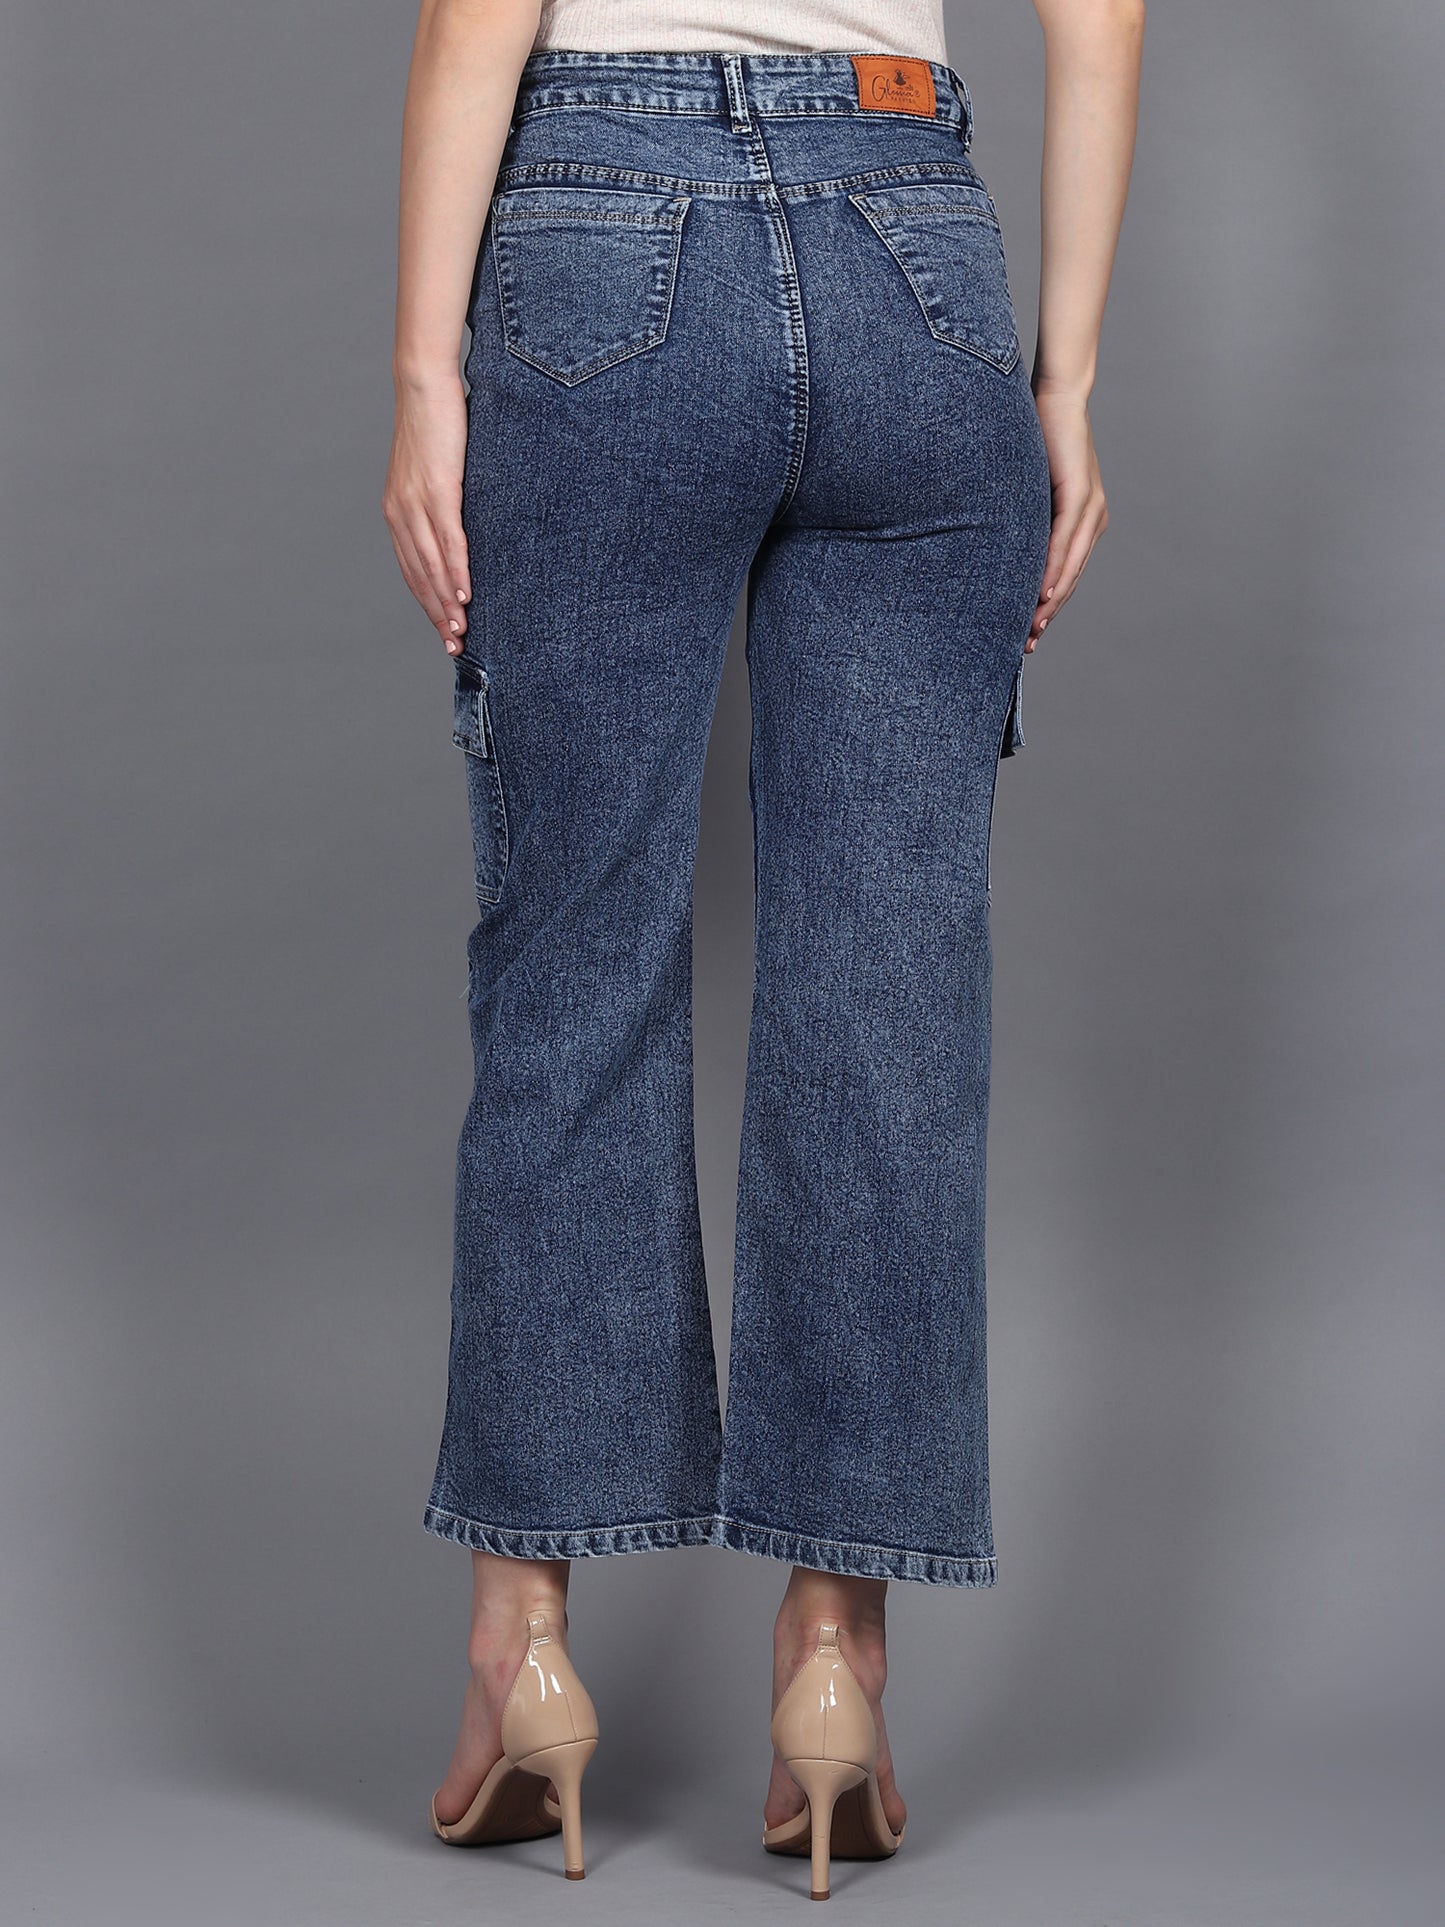 Blue Cargo Jeans For Women High Waist Straight Fit Stretchable Denim - 1214